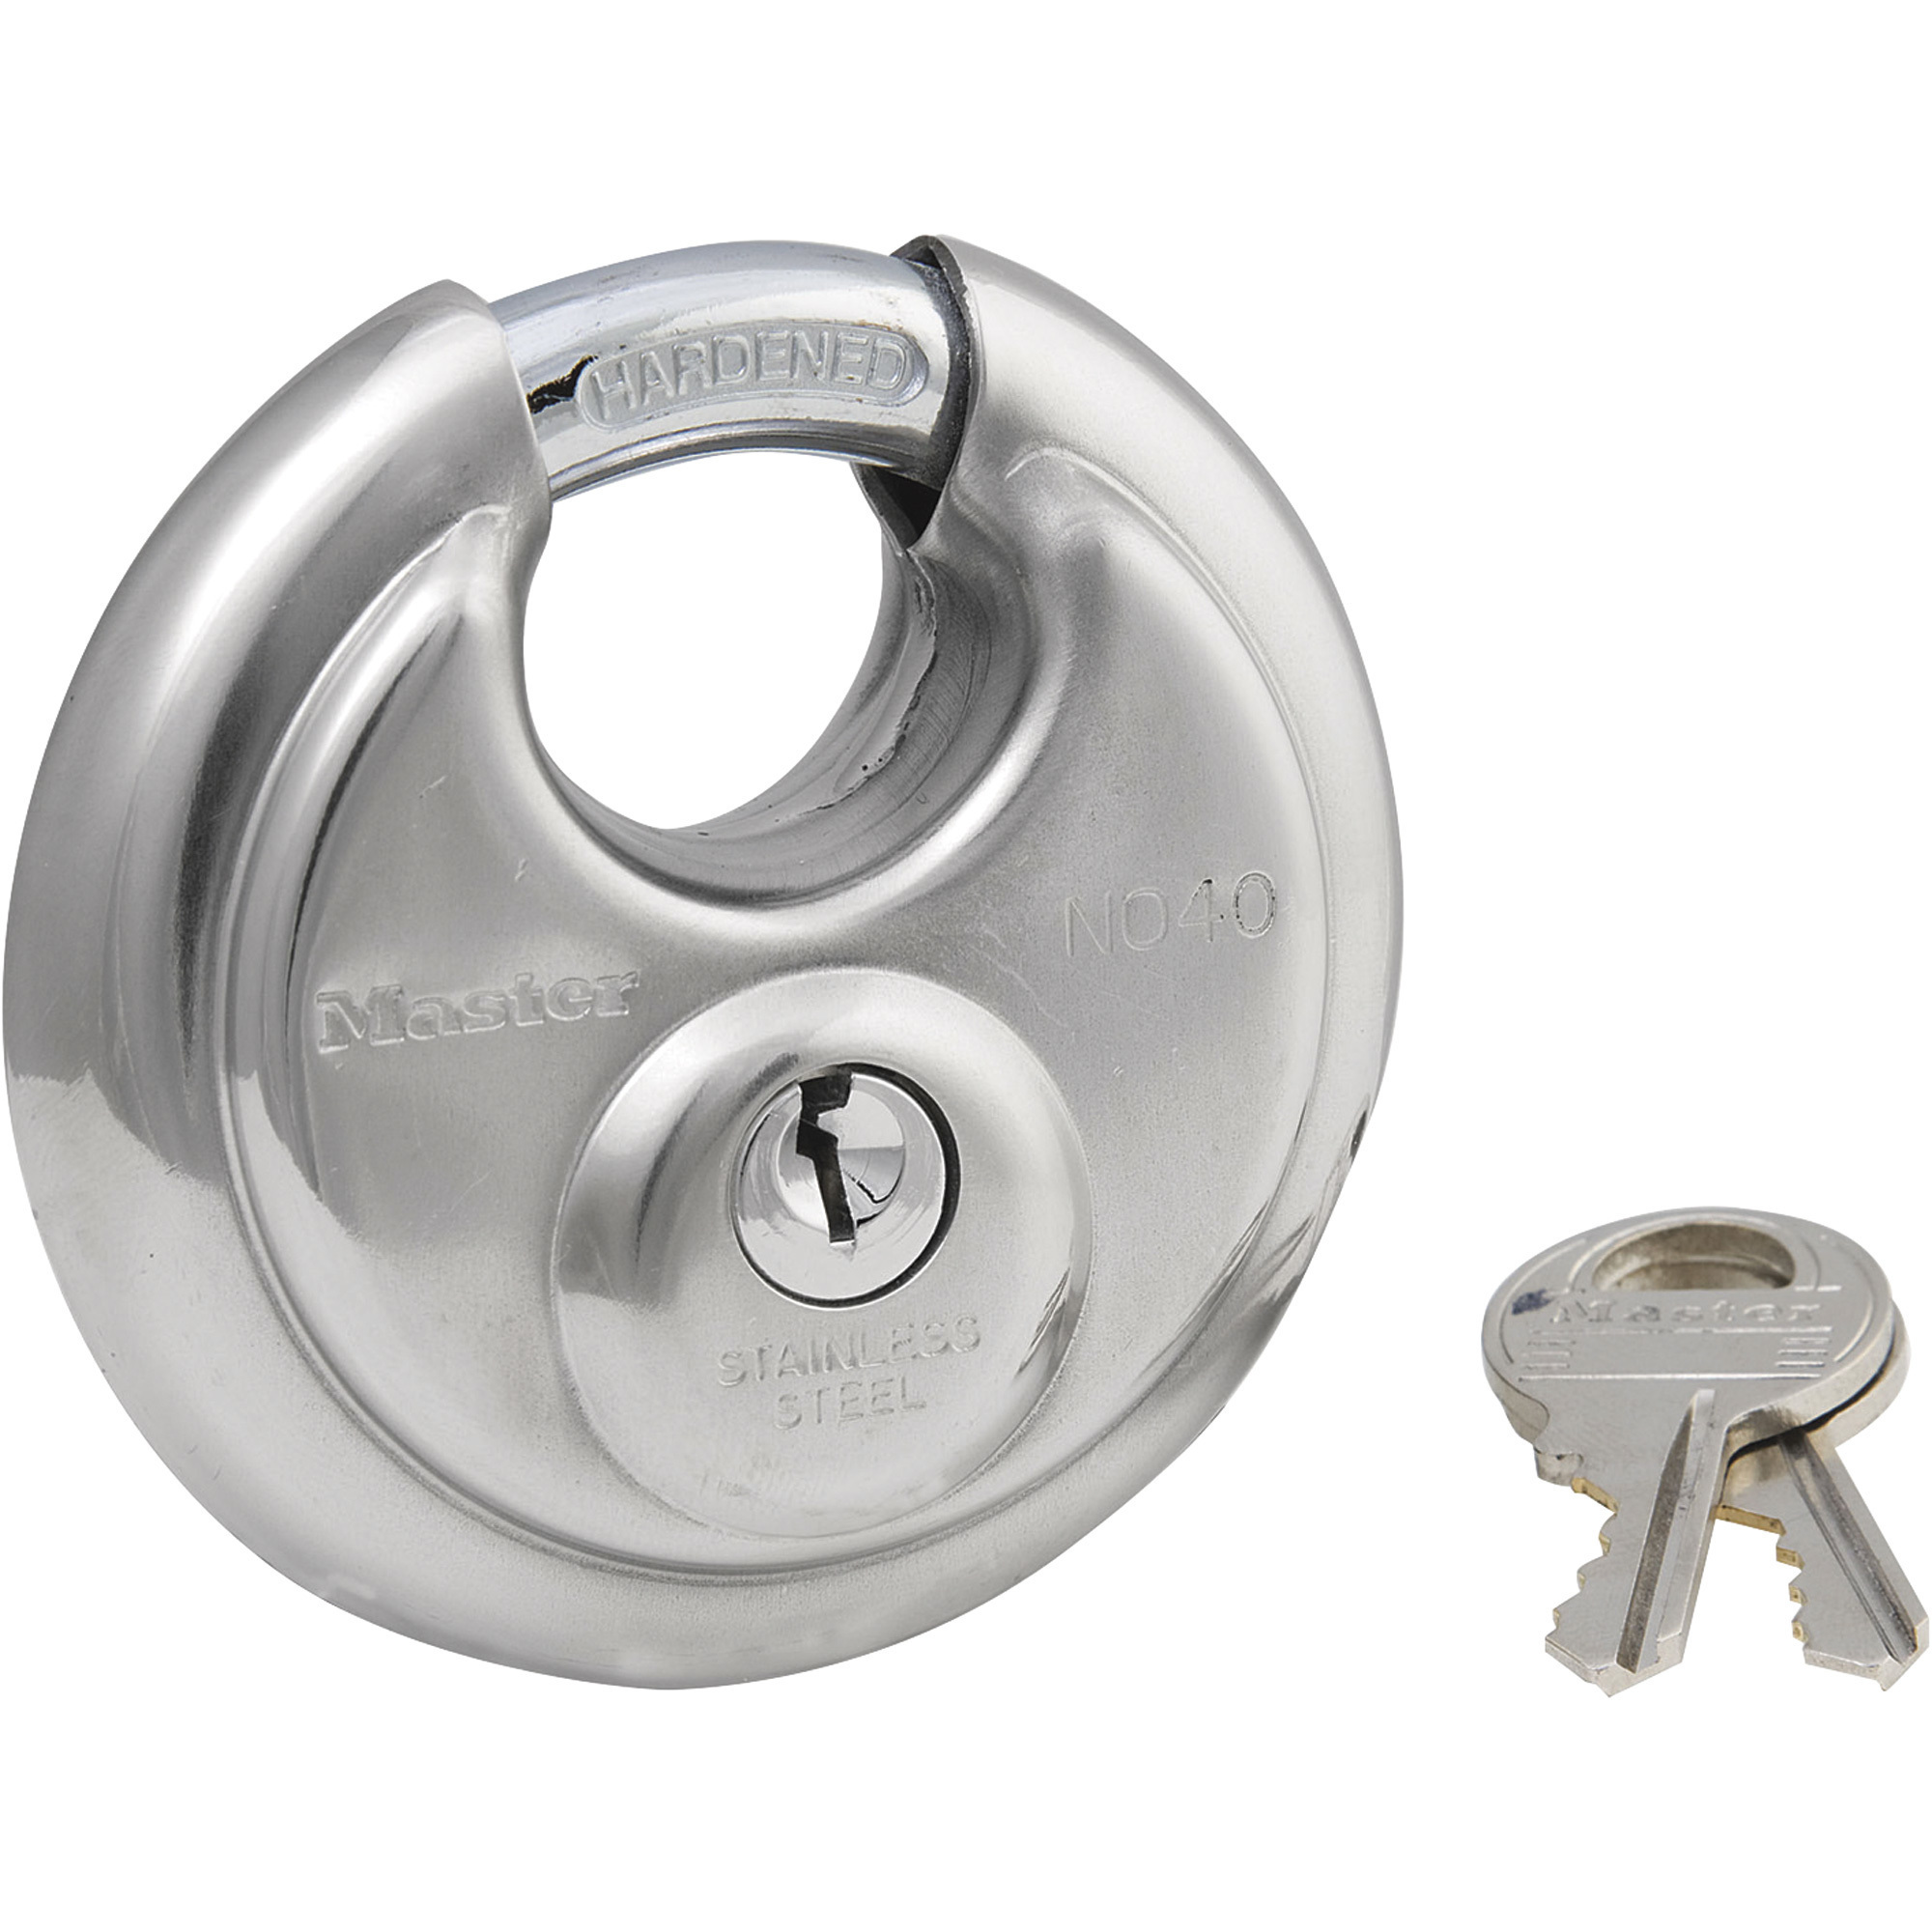 Master Lock 2-Pack Round Steel Padlocks with Shielded Shackle â 2 3/4Inch W, Model 40T